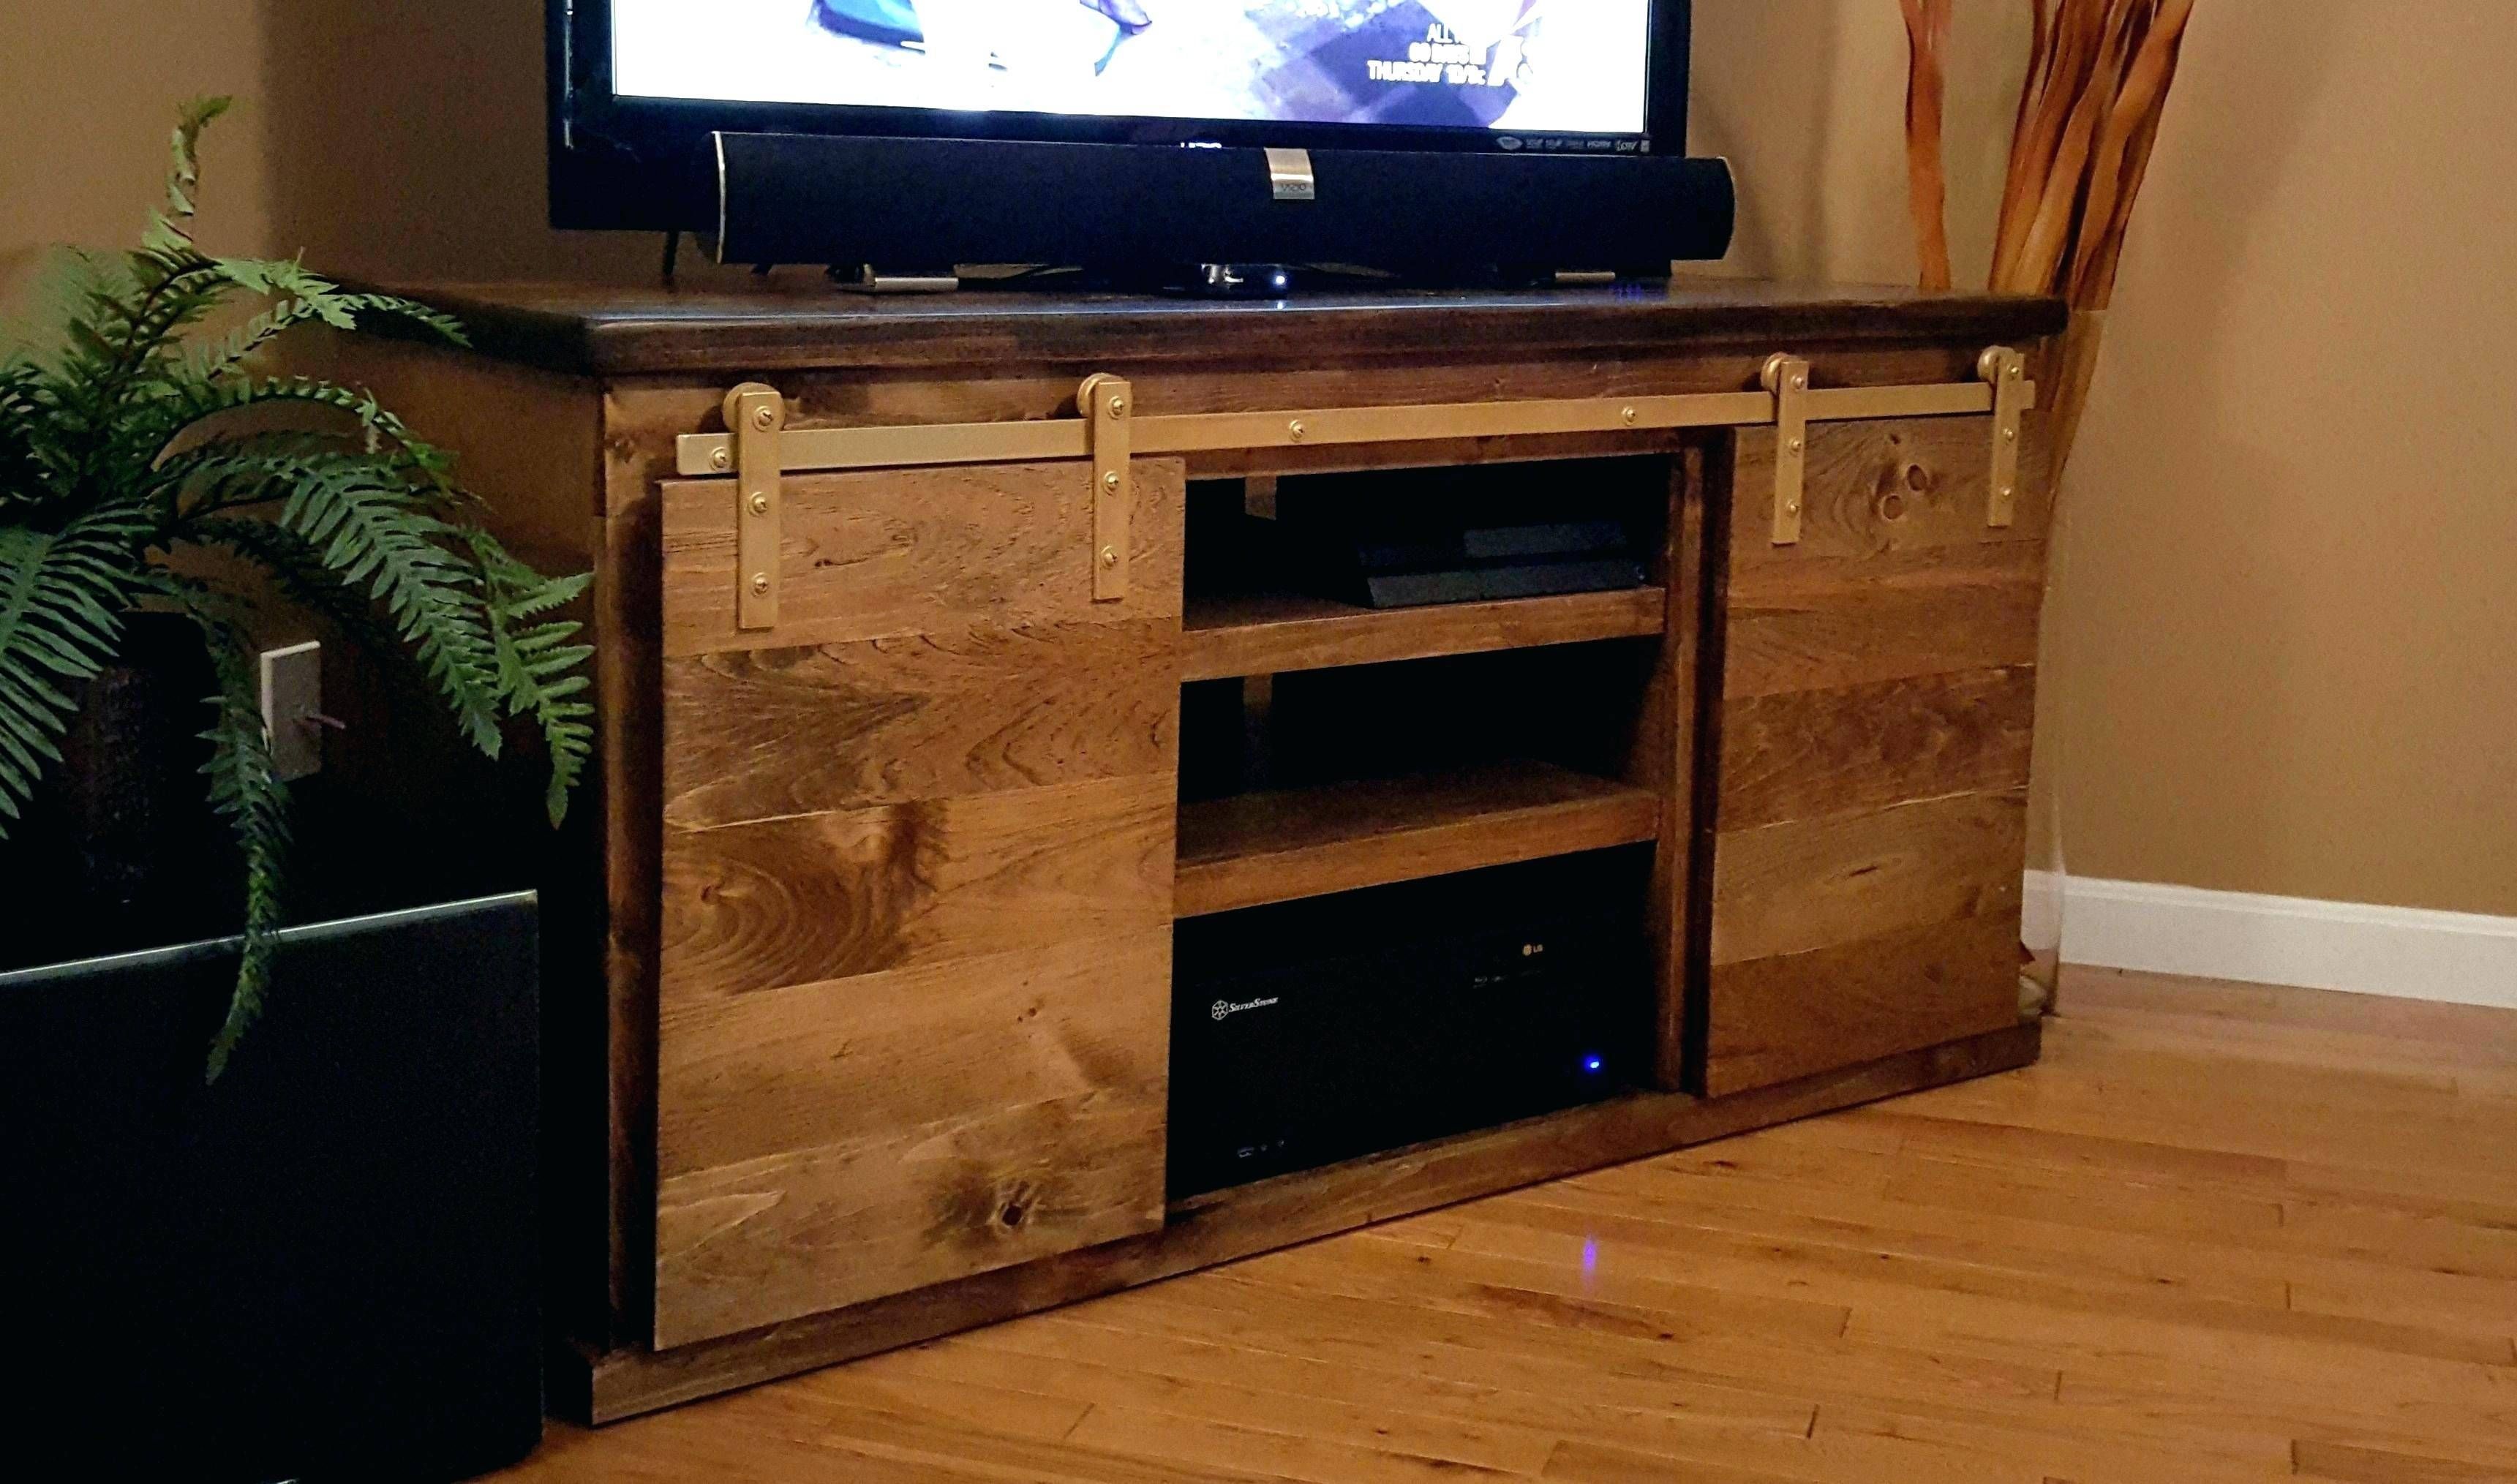 Tv Stand : Wondrous Innovative Antique Tv Cabinets With Doors 7 Regarding Antique Style Tv Stands (View 14 of 15)